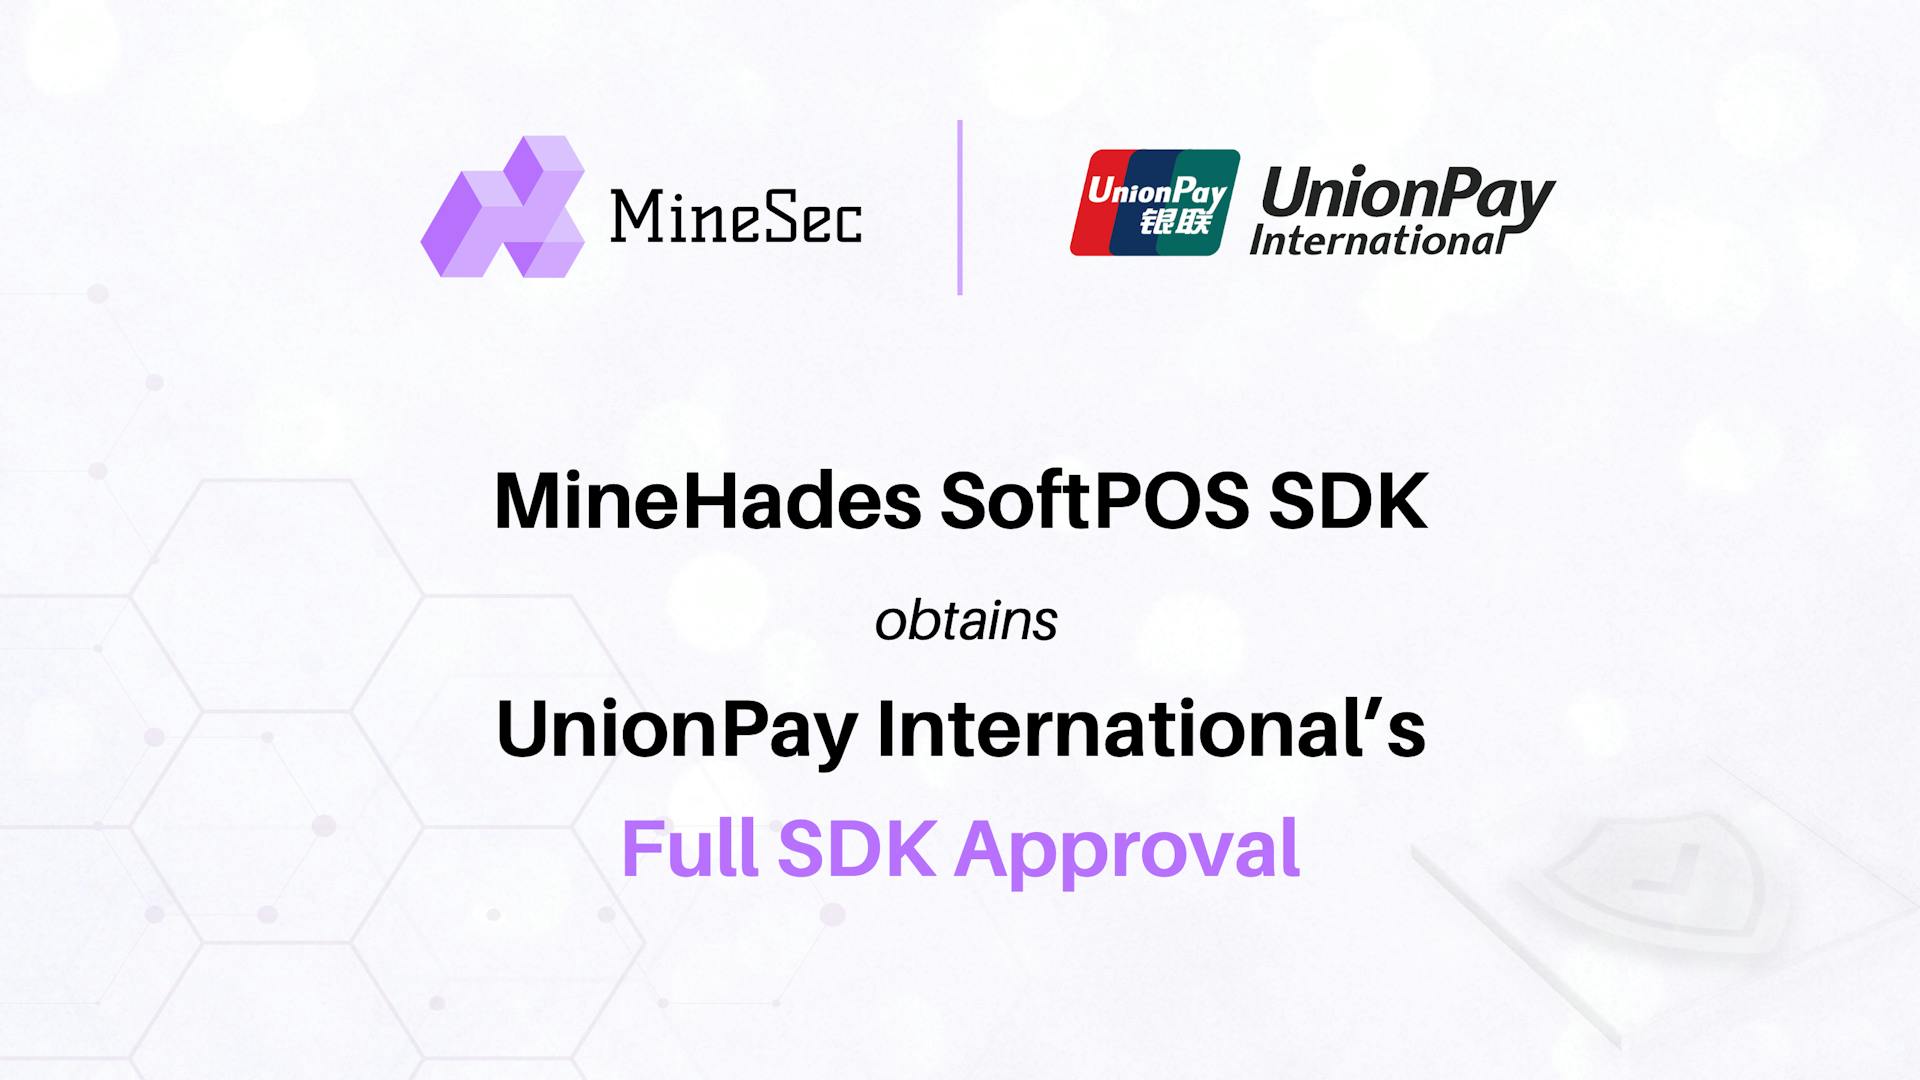 MineSec obtains world's first approval from UnionPay International for MineHades SoftPOS SDK